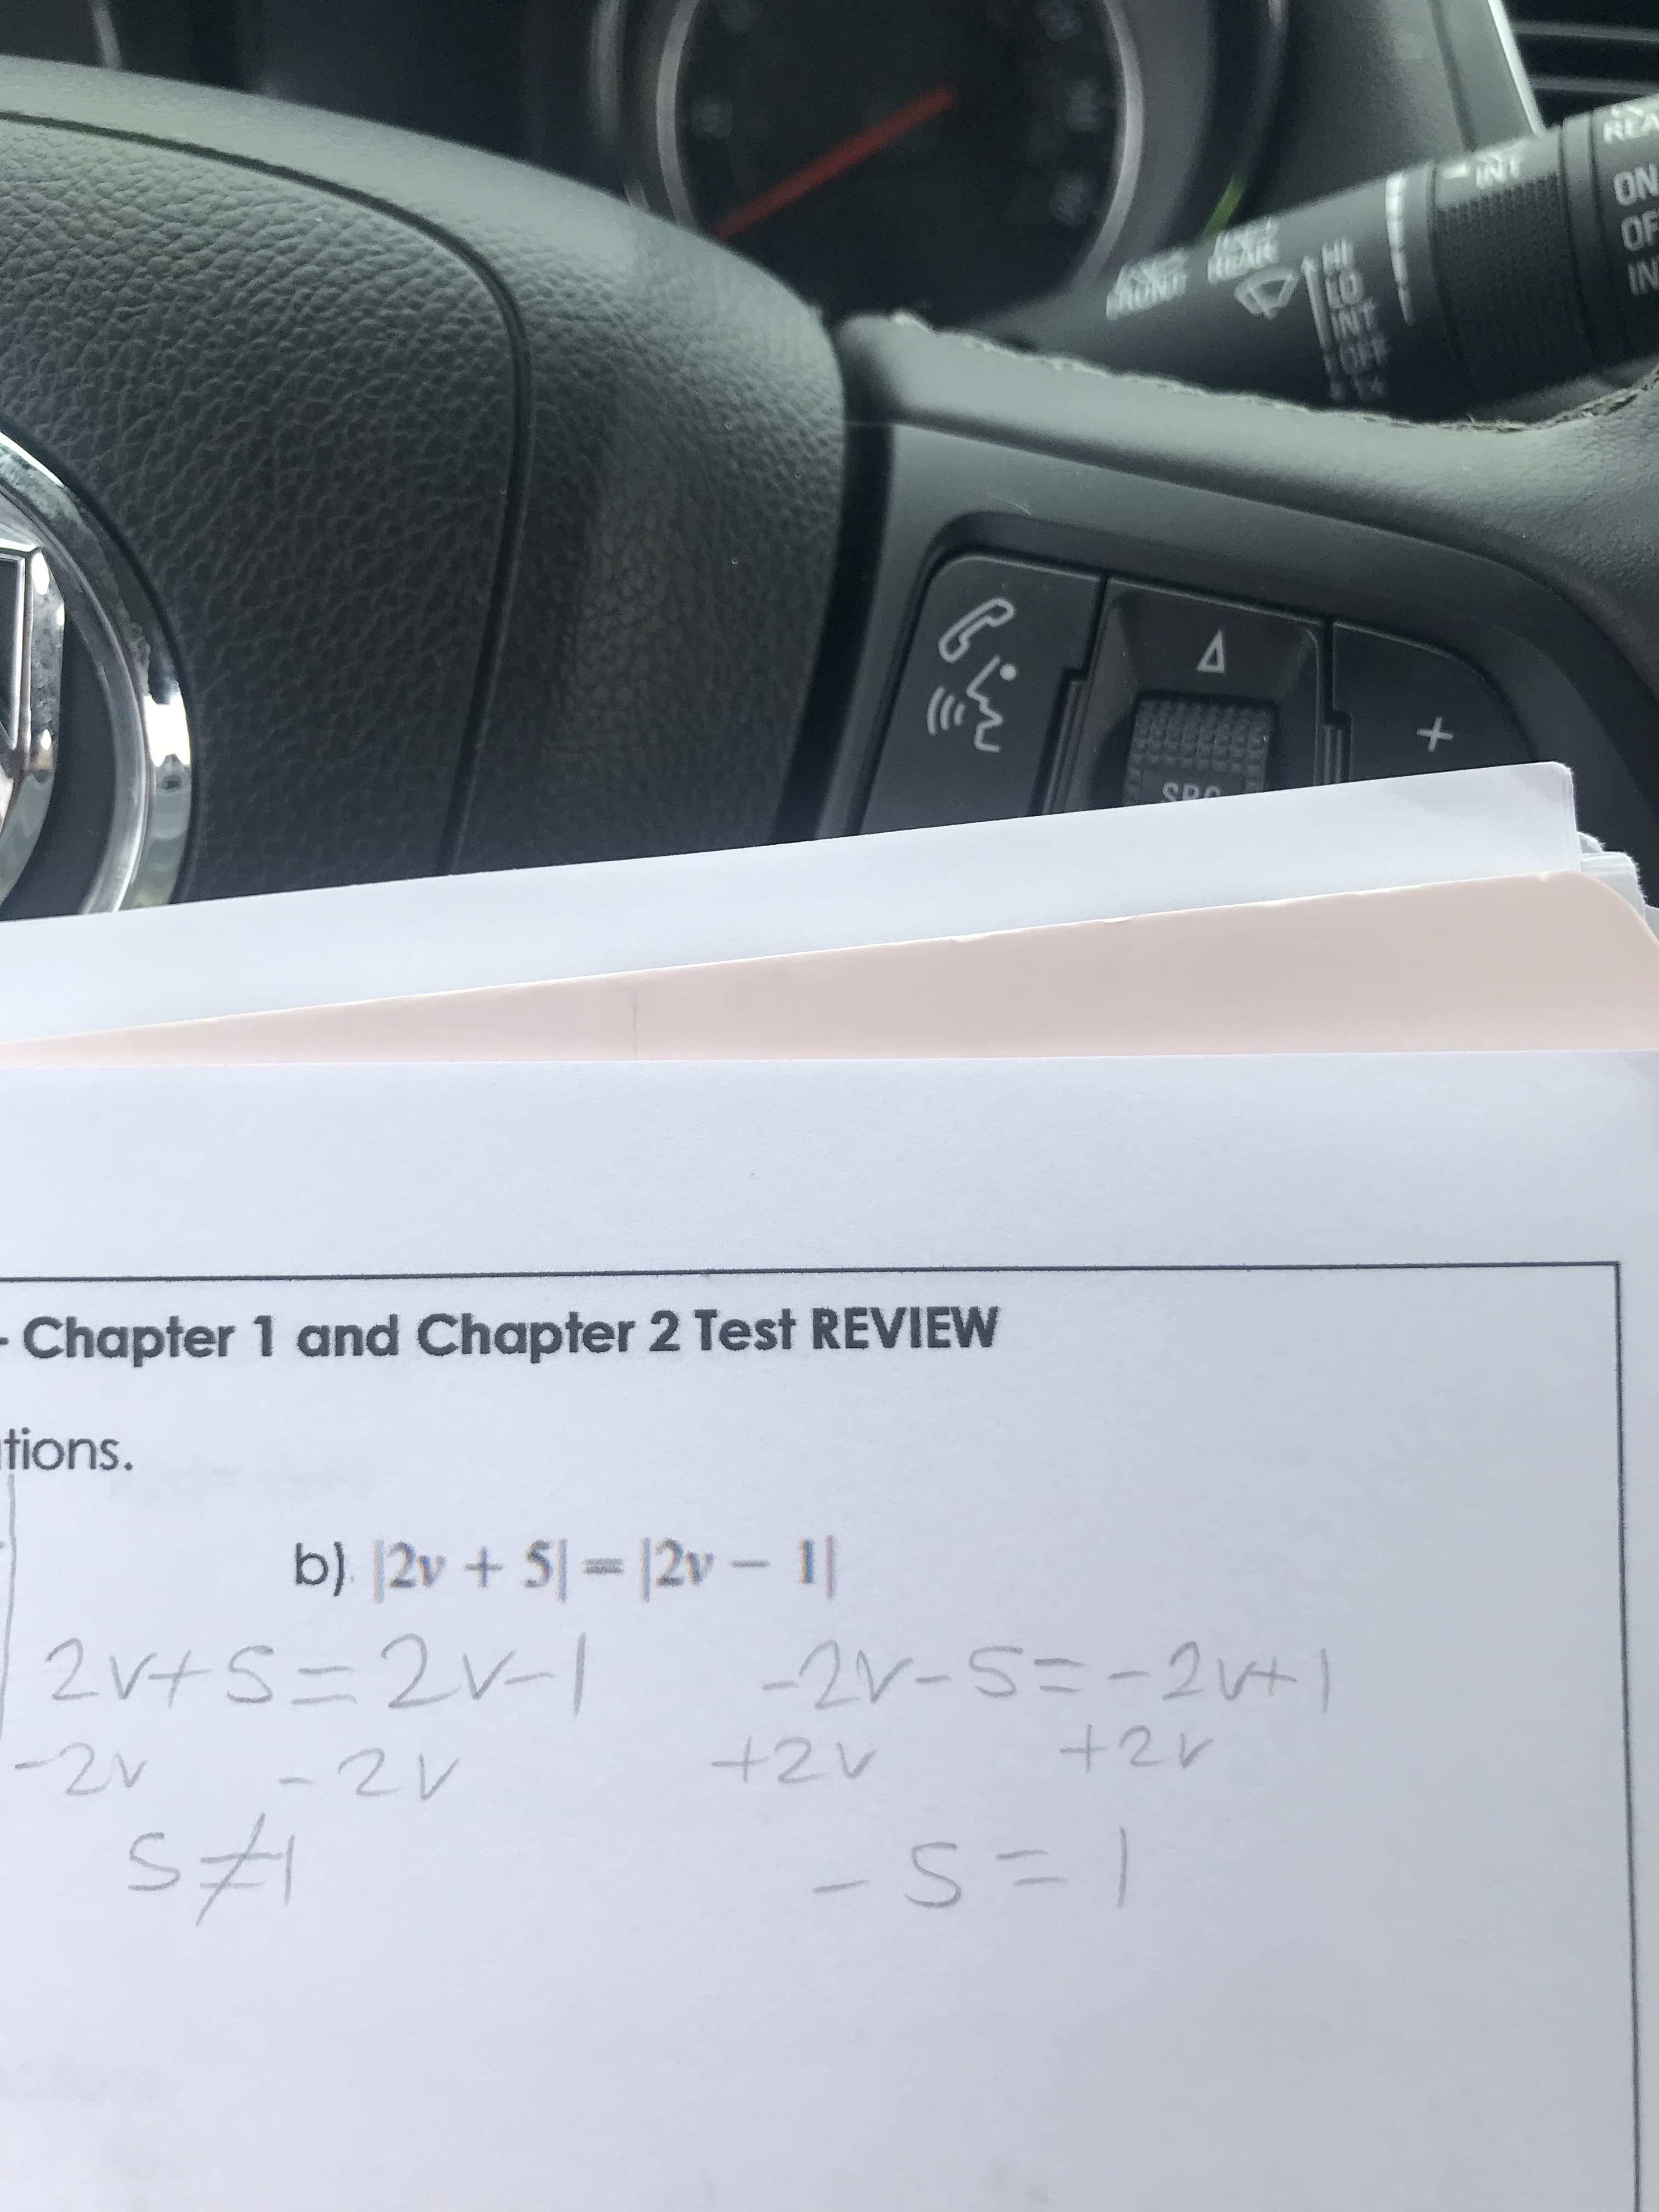 REA
INT
ON
OF
IN
PH
LO
INT
OFF
A
SPO
Chapter 1 and Chapter 2 Test REVIEW
tions.
b) 2v+ 5-12v- 1
2V+S2V
2V-M-2At
+2
-2v
-2V
+2V
- S= 1
